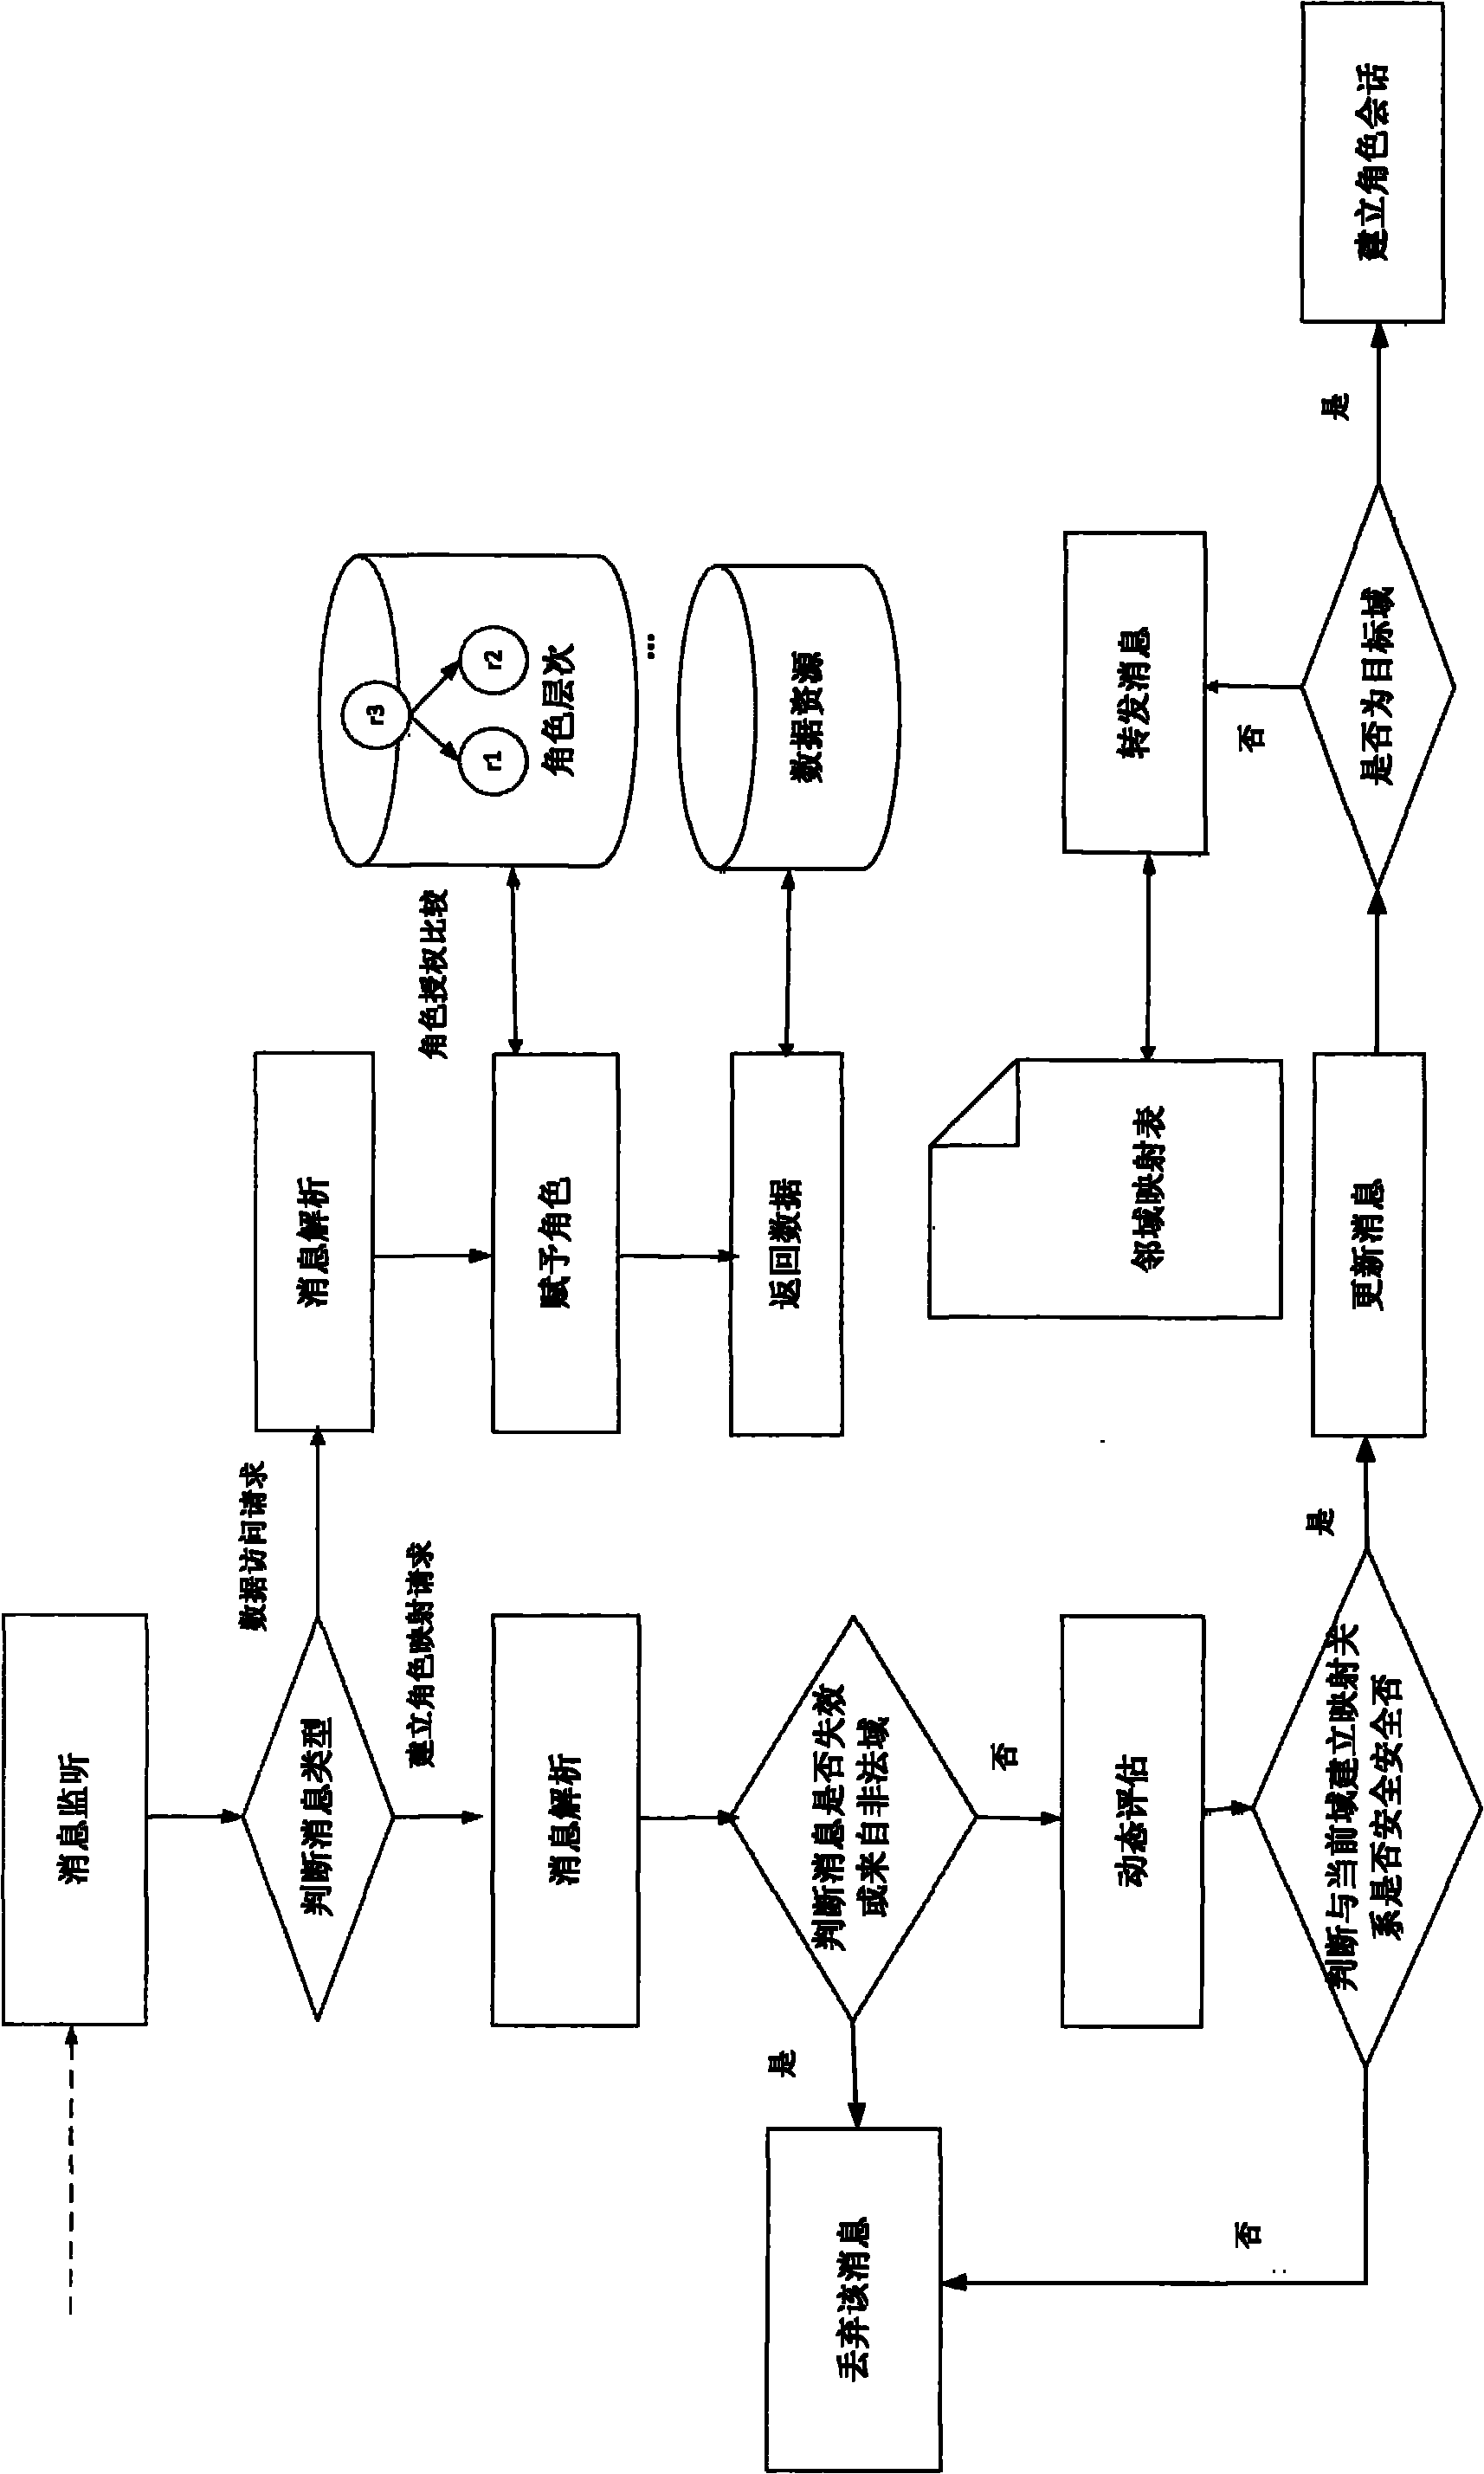 Data access controlling method crossing safety area based on role mapping